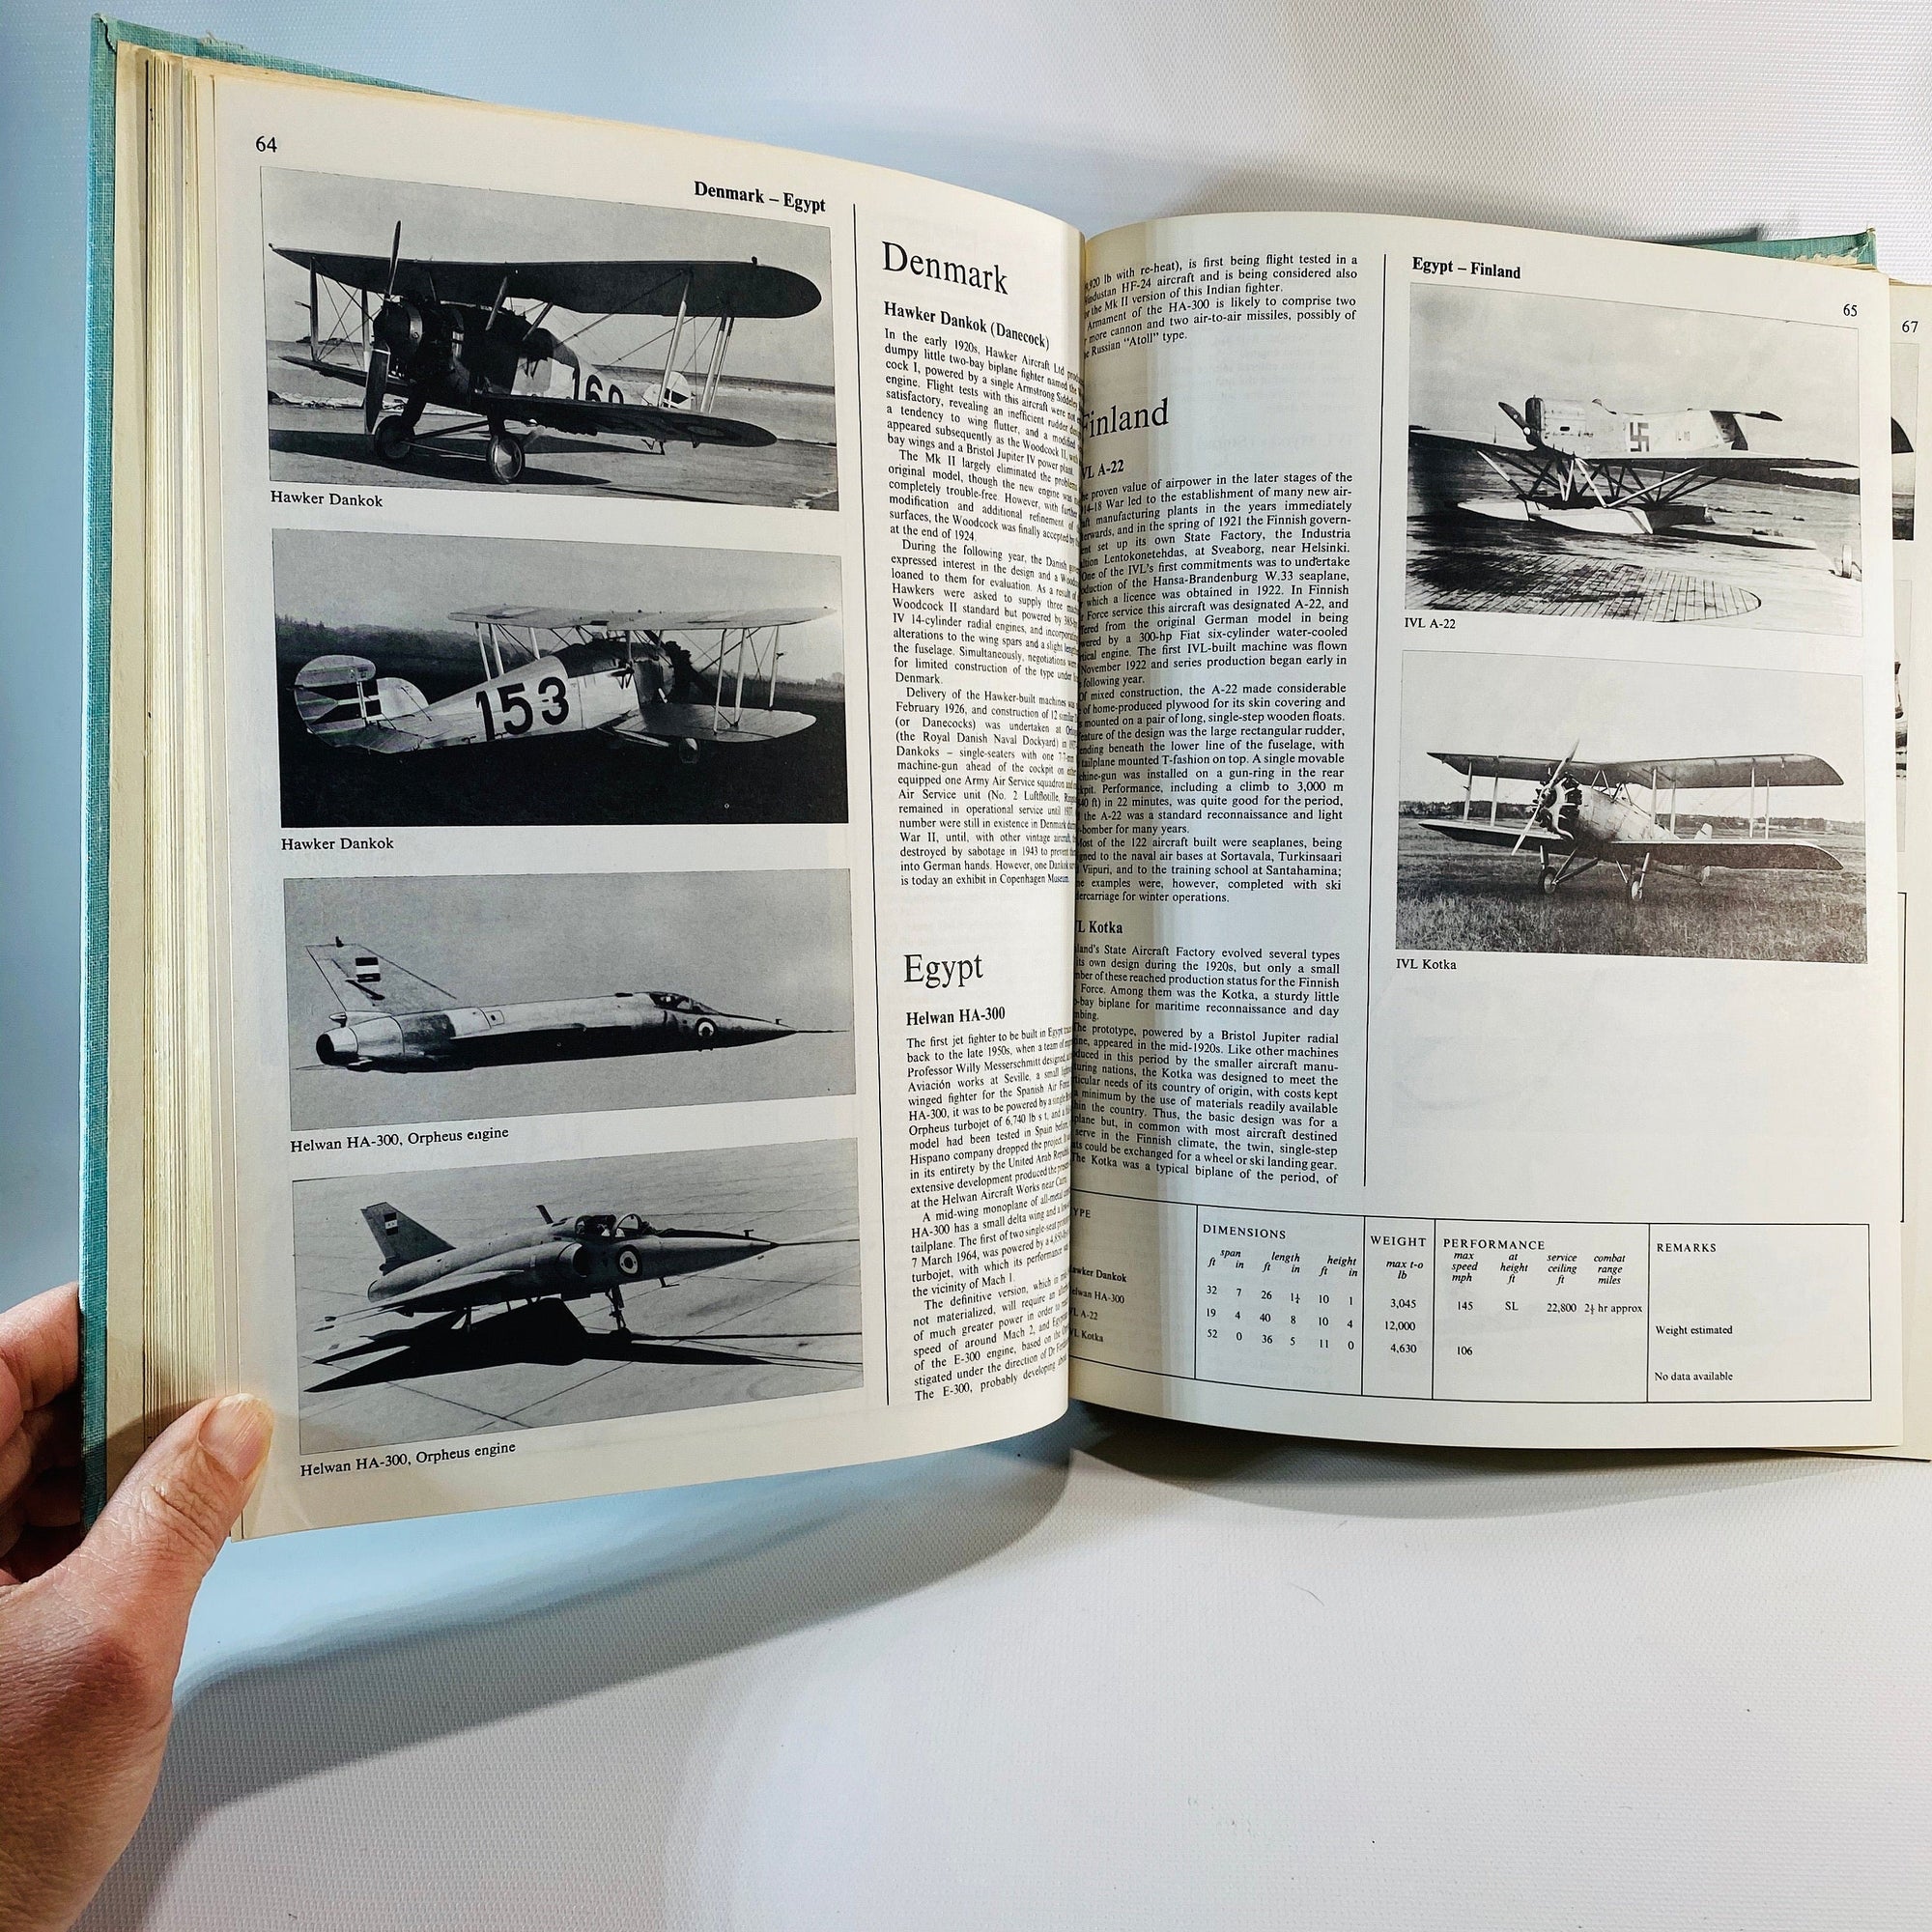 Combat Aircraft of the World from 1909 to Present by John W.R. Taylor 1969 Vintage Book